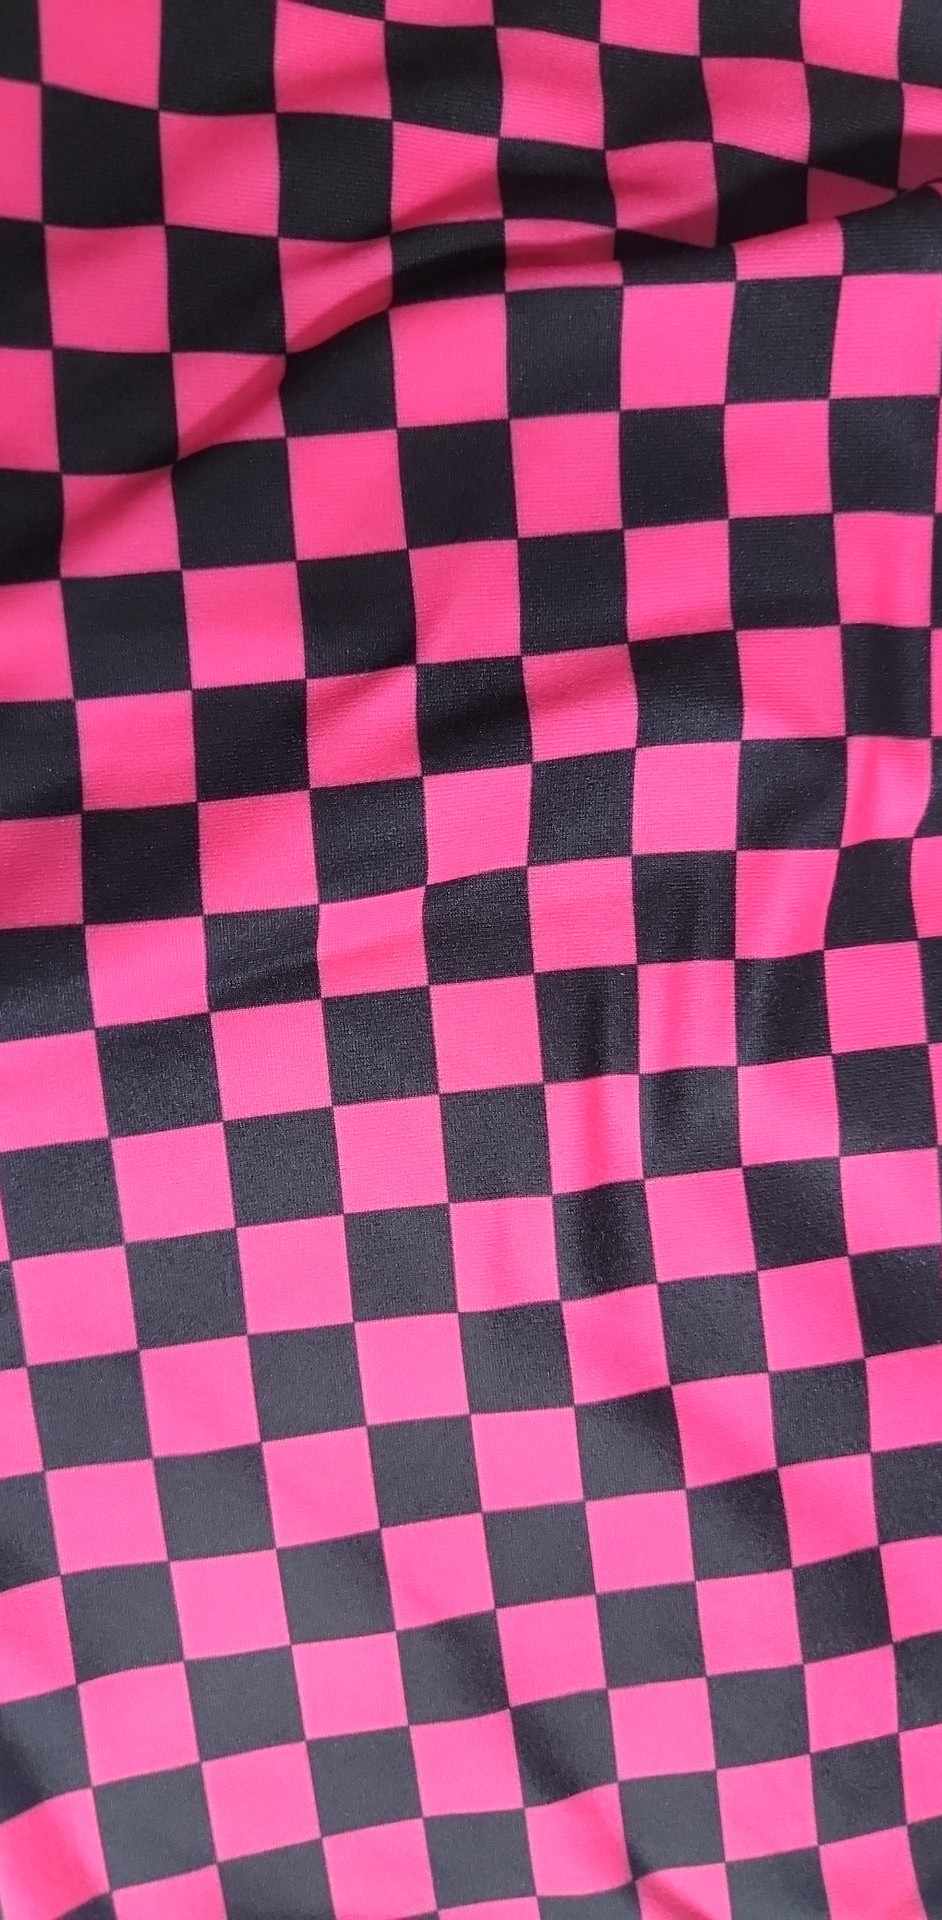 Pink and Black checkers